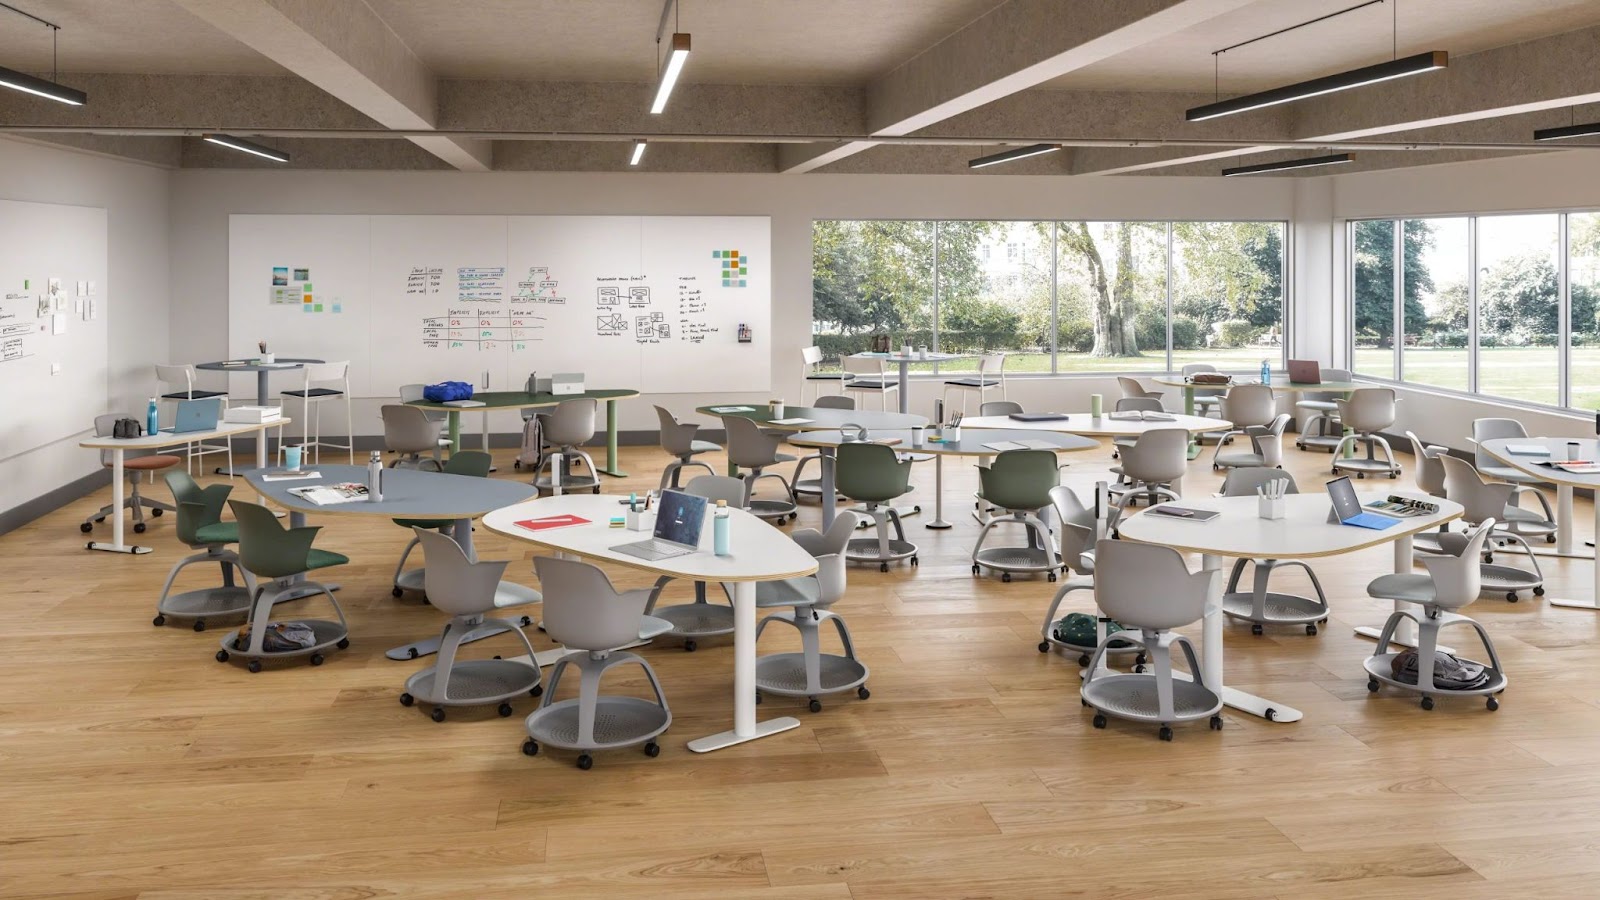 Node chairs from Steelcase surrounding desks in classroom